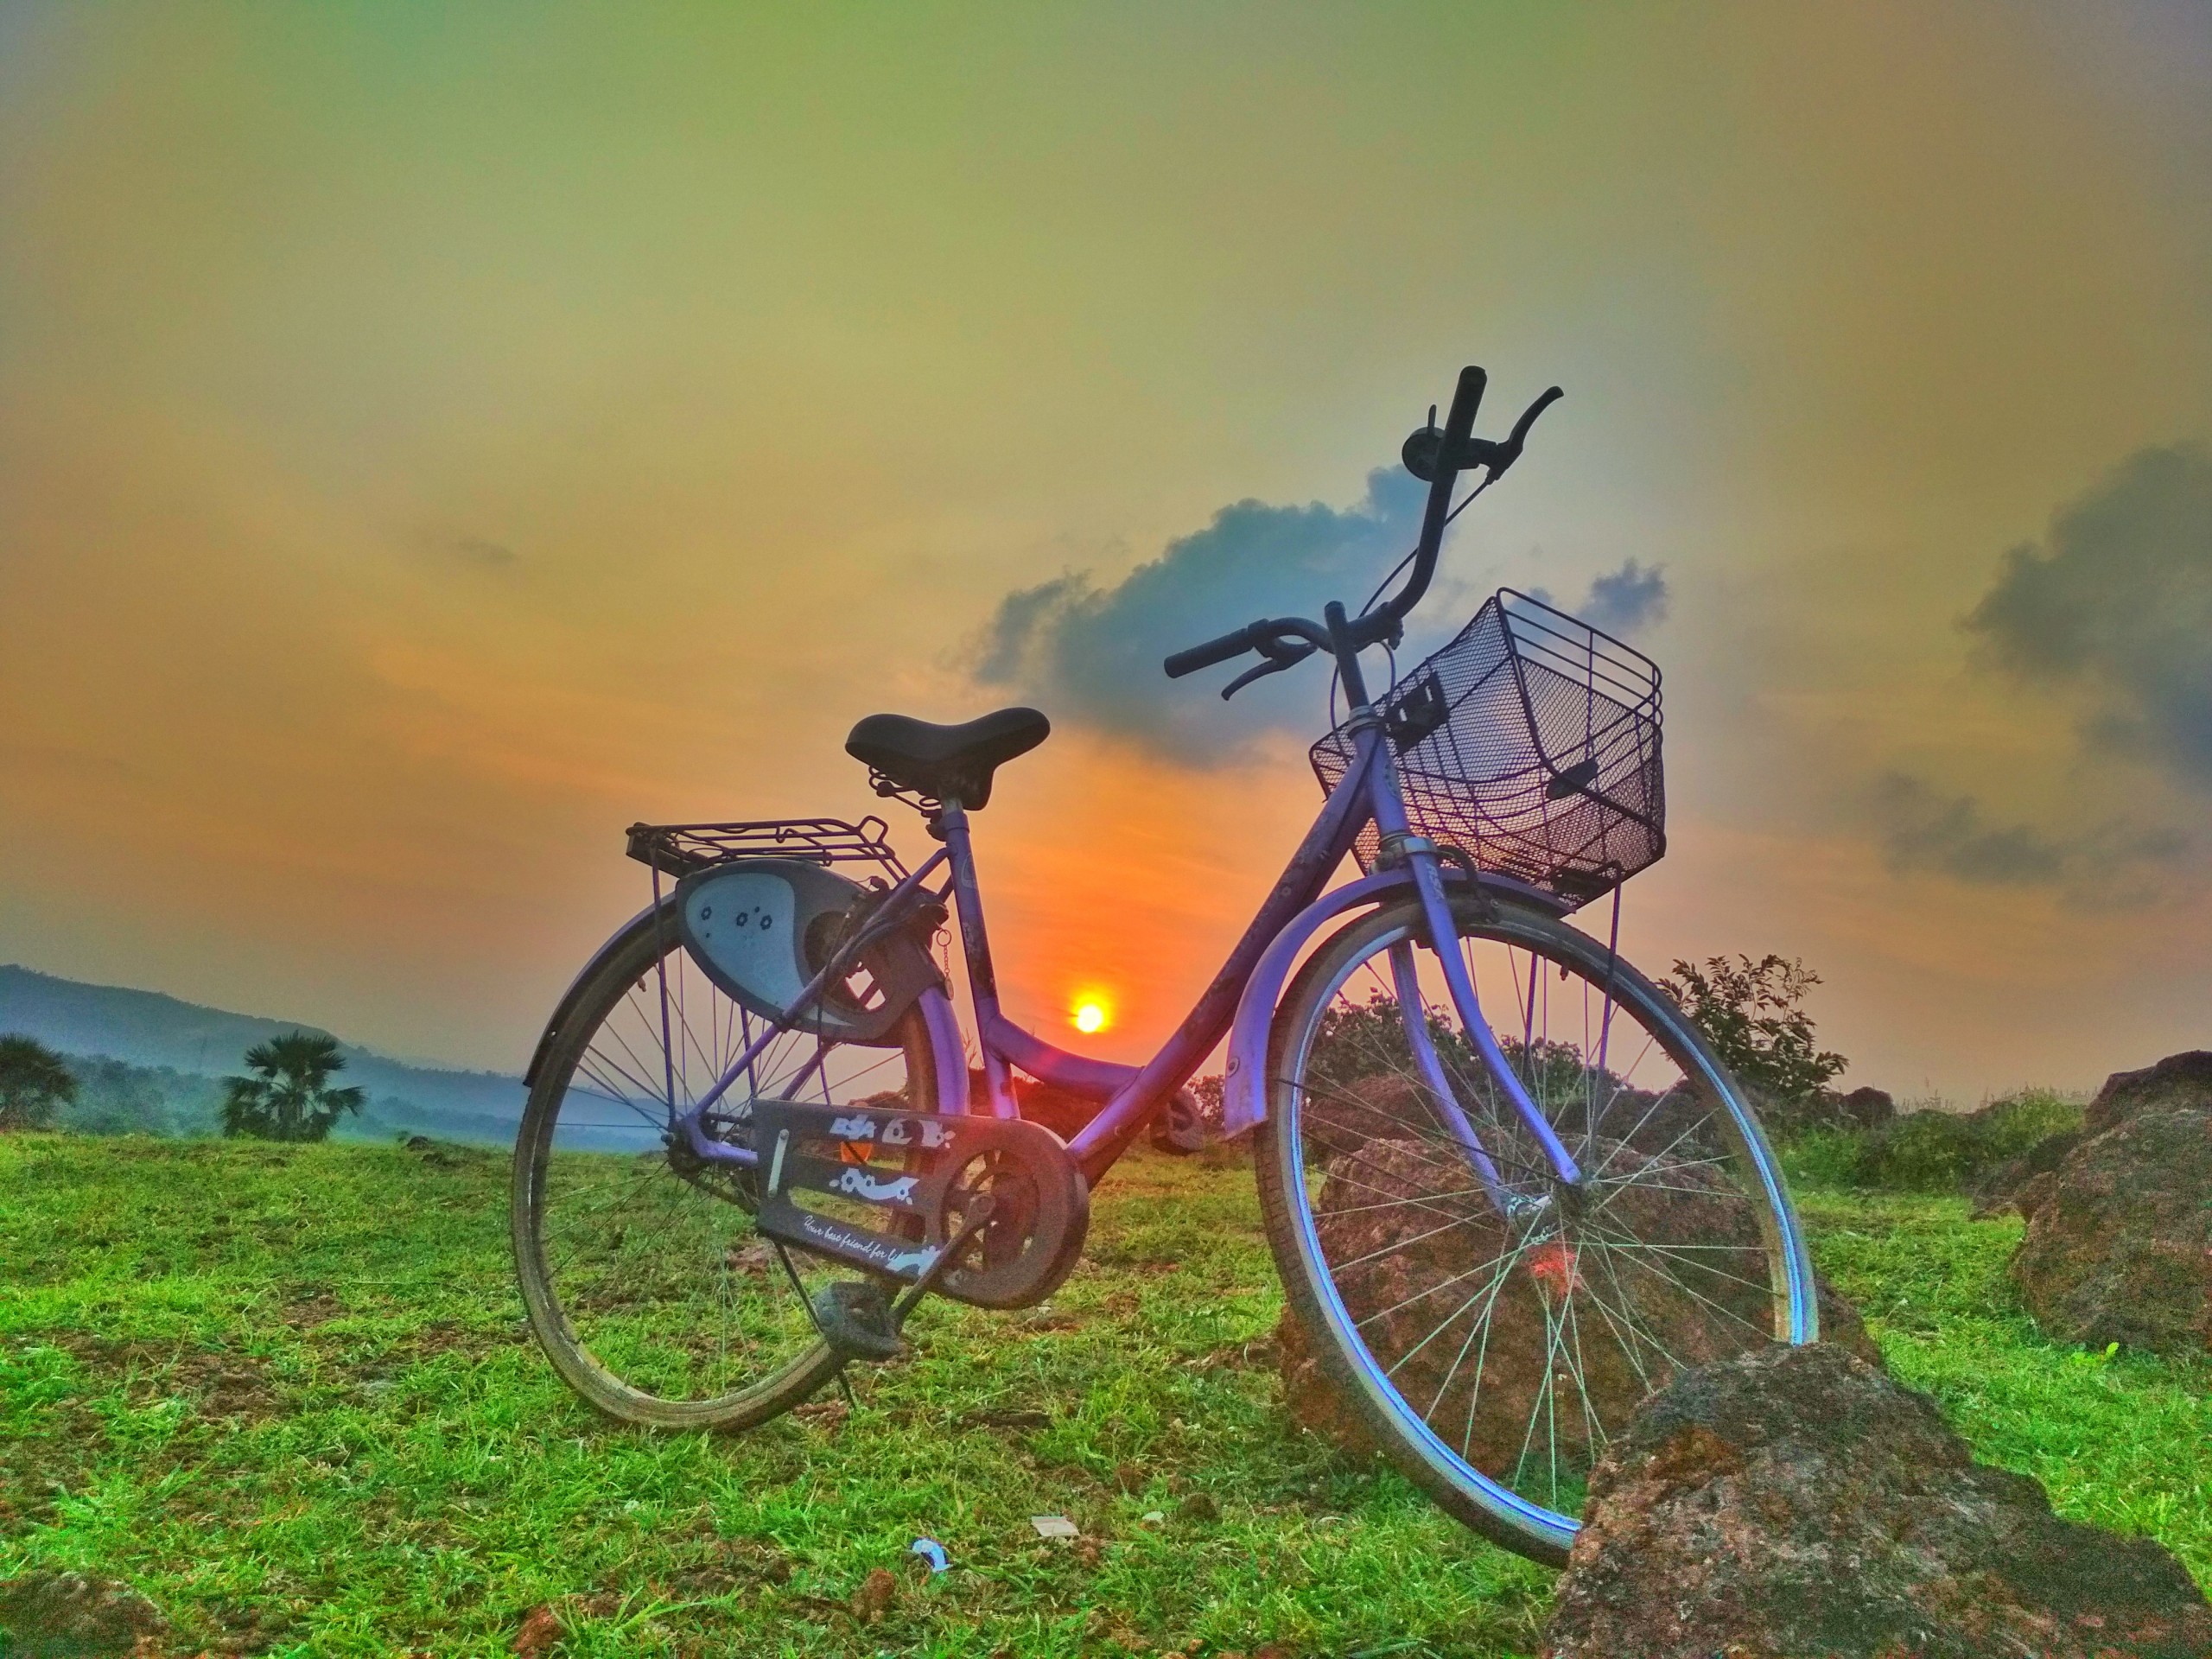 Sunset and Bicycle